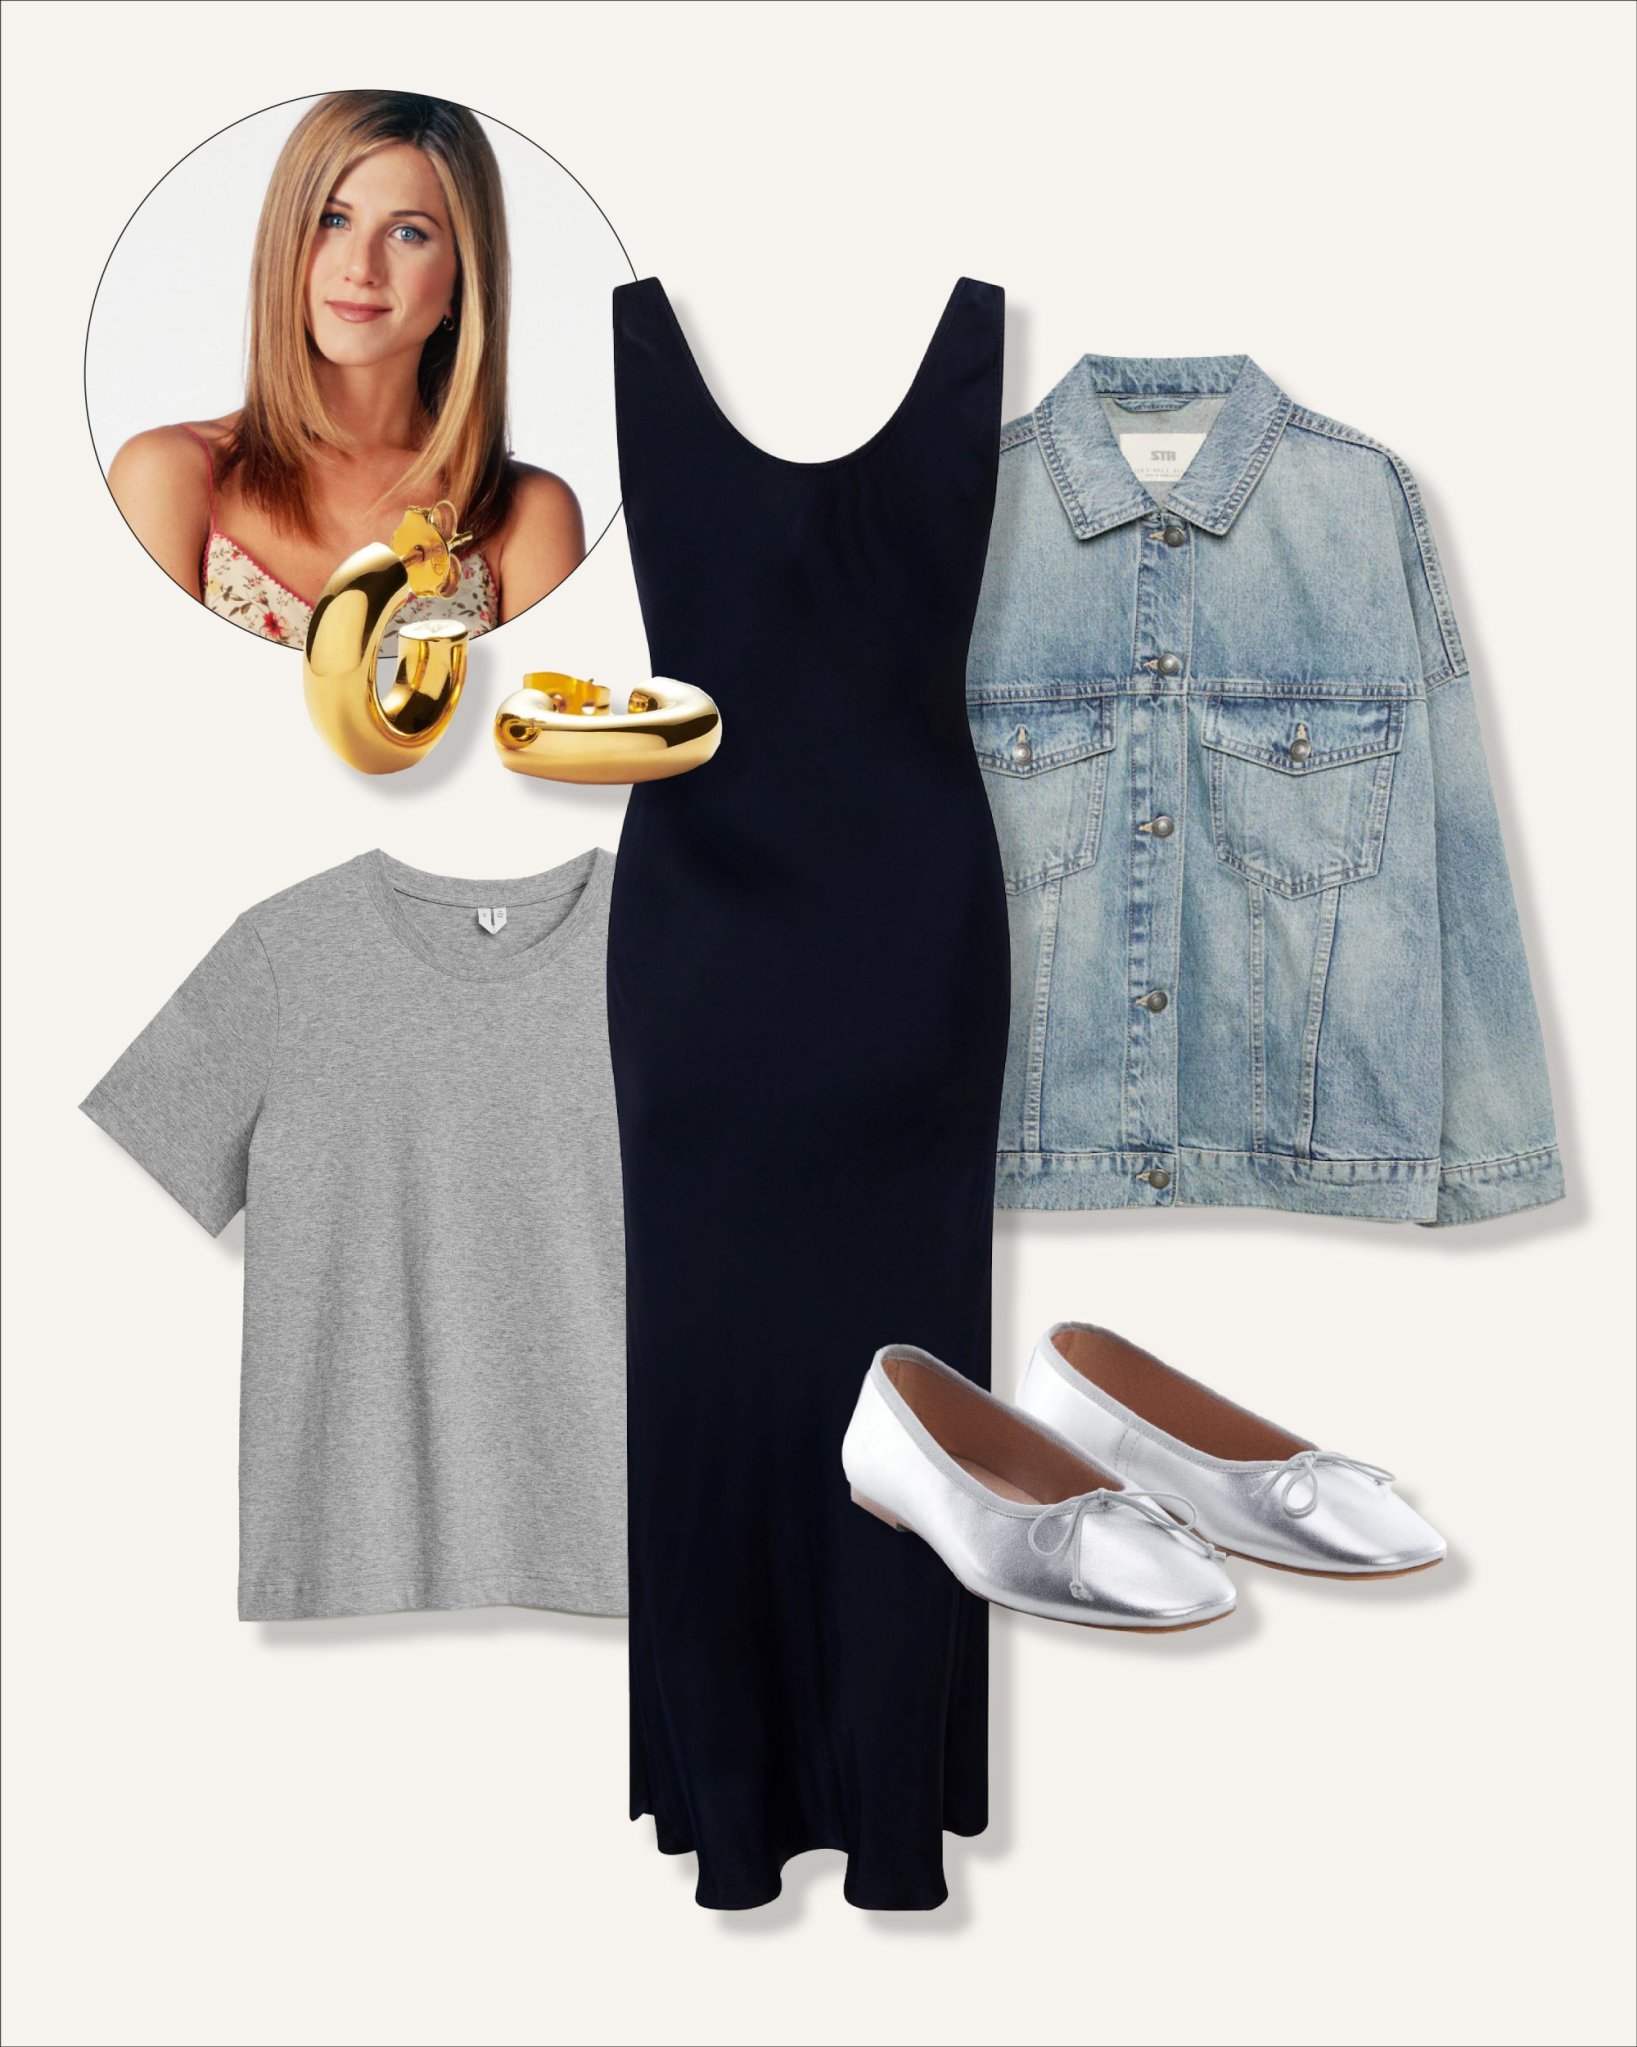 Rachel Green Inspired Summer Shopping and Owning One of Her